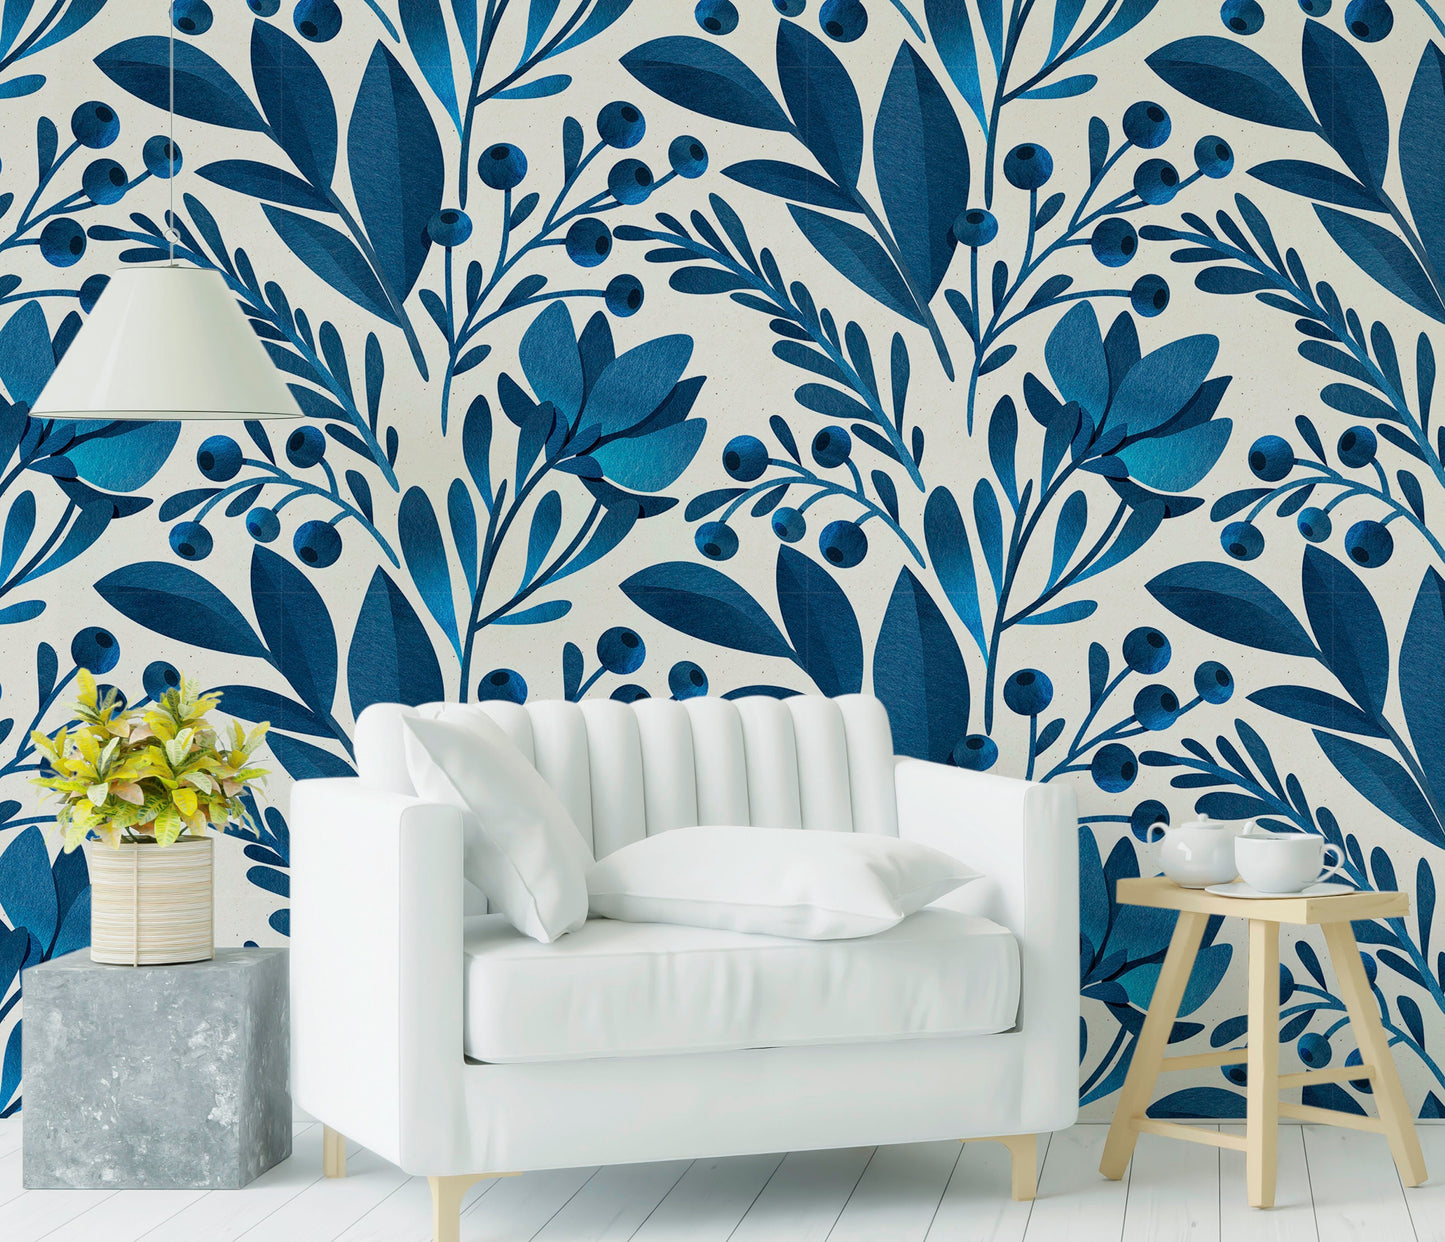 Blue Leaf Wallpaper, Blue Floral Wallpaper Peel and Stick, Tropical Leaves Wallpaper, Nursery Wallpaper, Removable Wall Paper